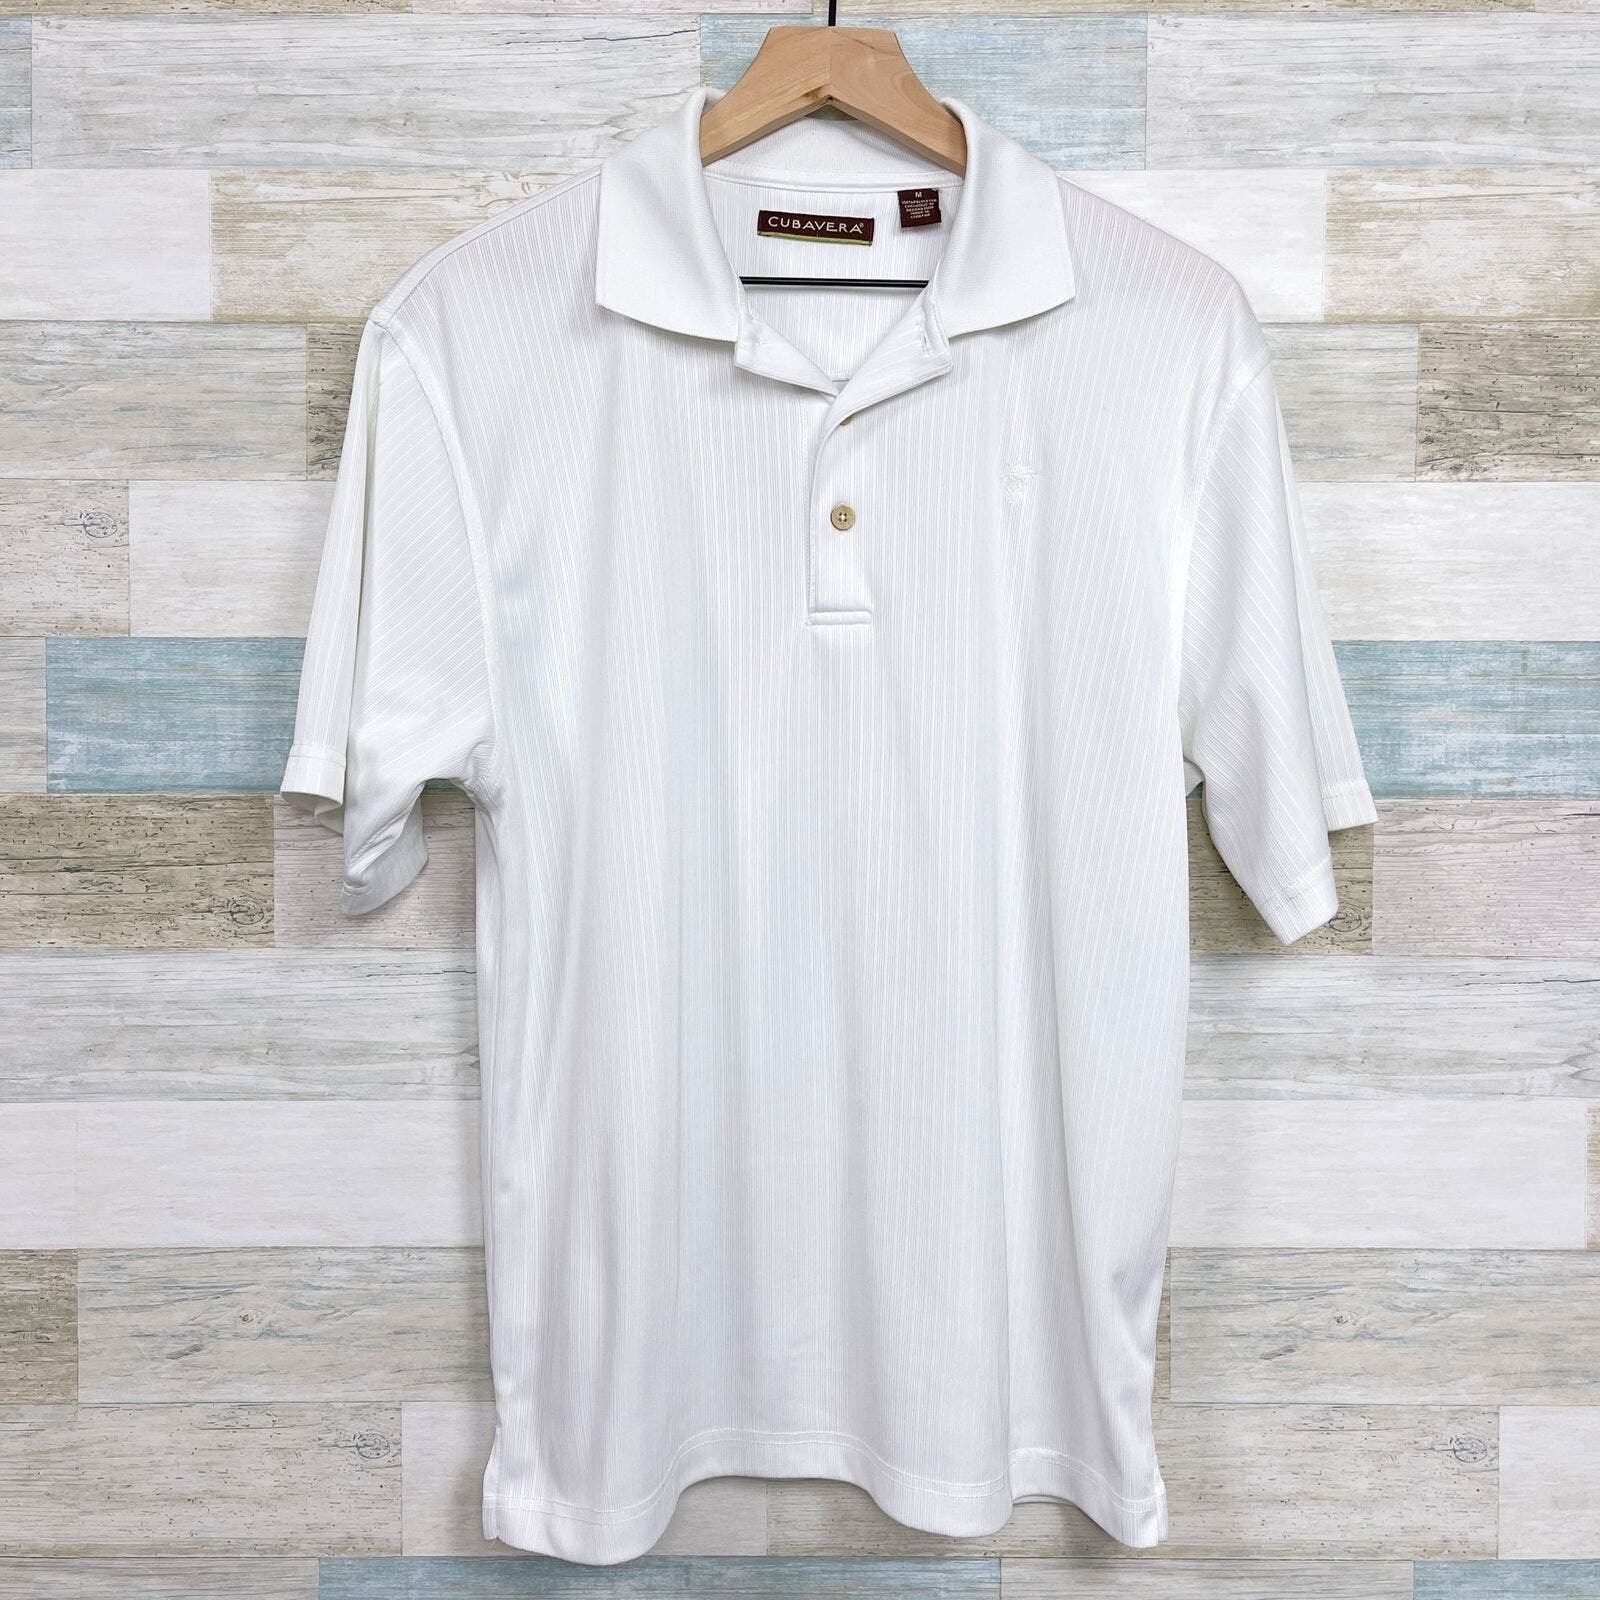 Primary image for Cubavera Textured Polo Shirt White Solid Short Sleeve Casual Stretch Mens Medium